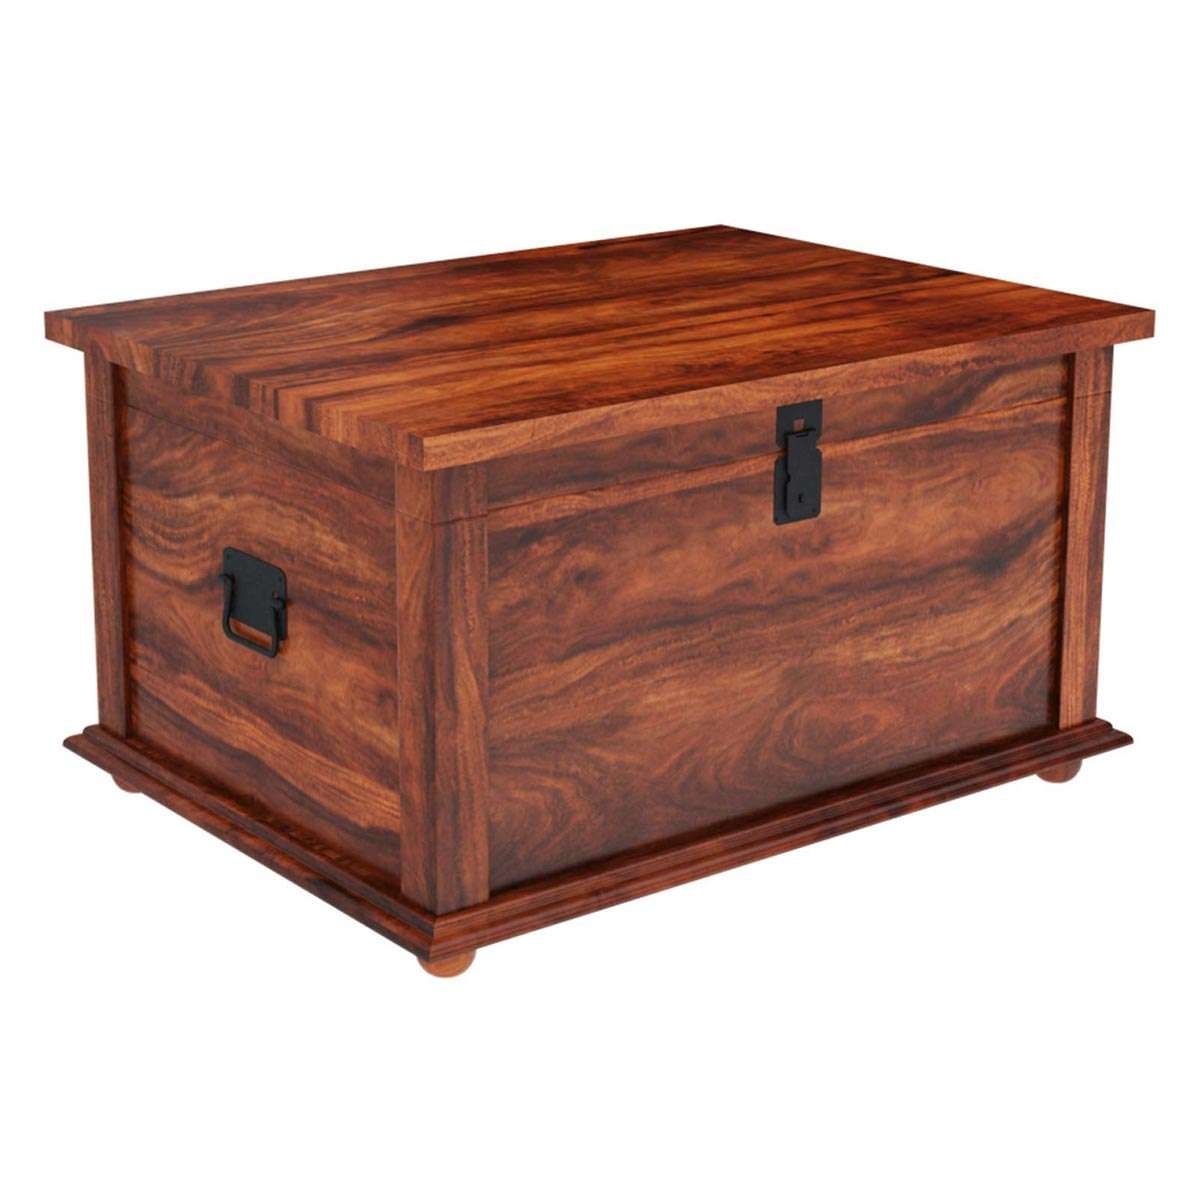 Most Popular Trunk Chest Coffee Tables With Regard To Wood Storage Grinnell Storage Chest Trunk Coffee Table (View 10 of 20)